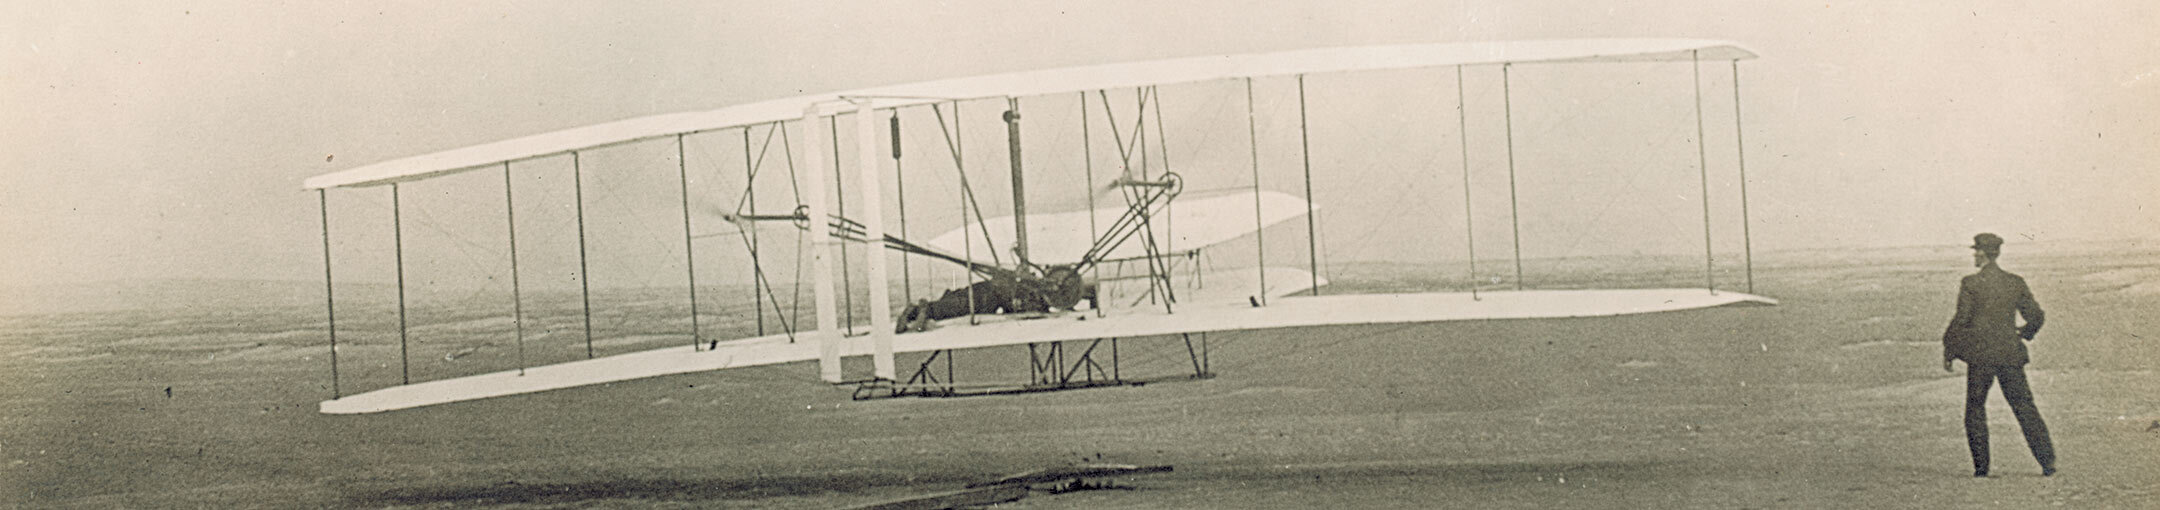 wright brothers plane in flight